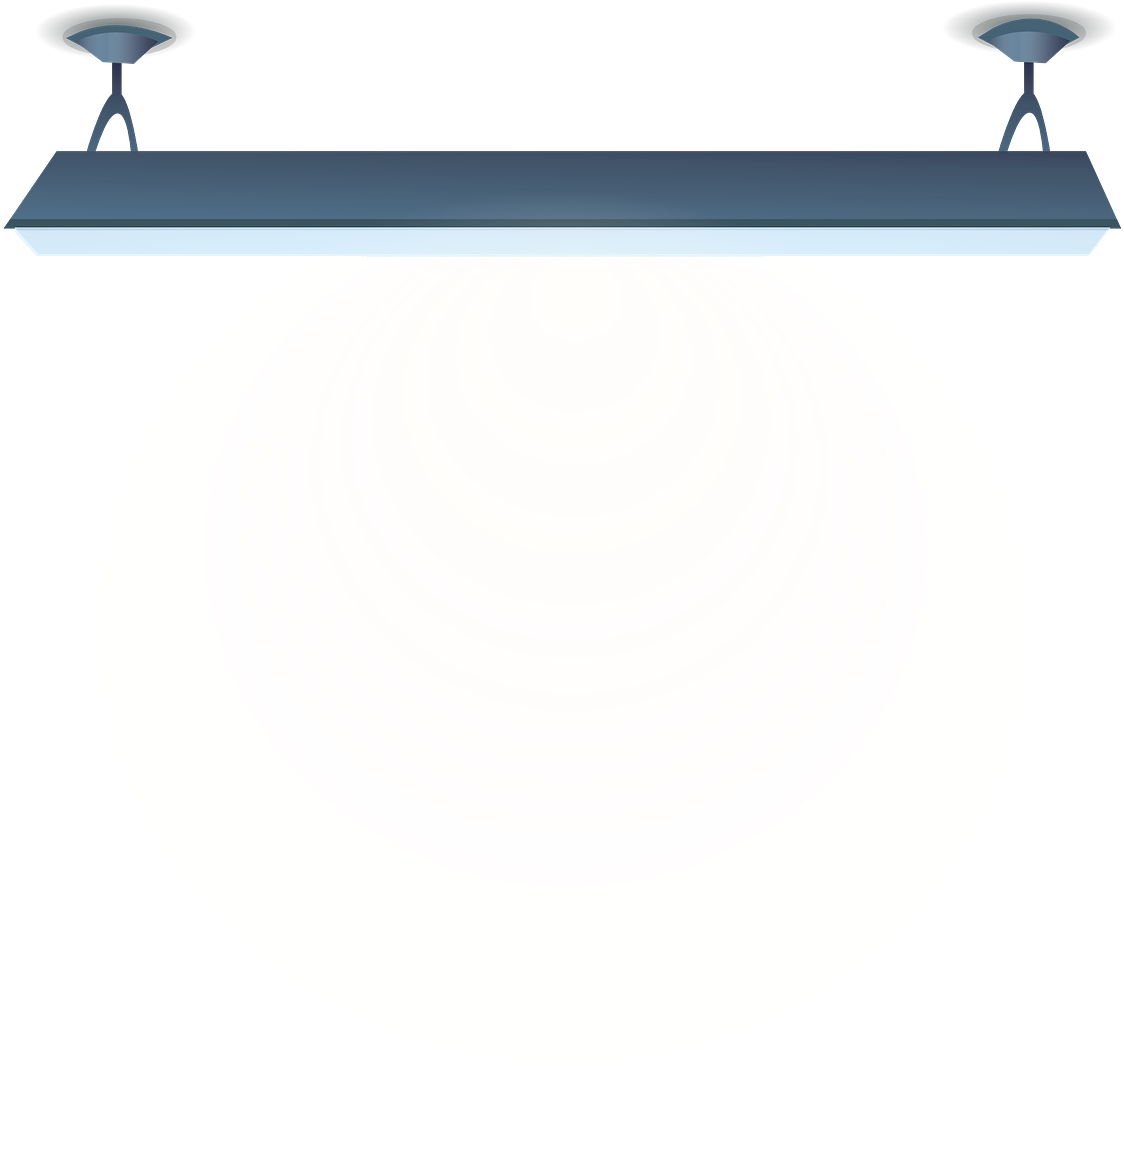 A Light Fixture With A Black Background